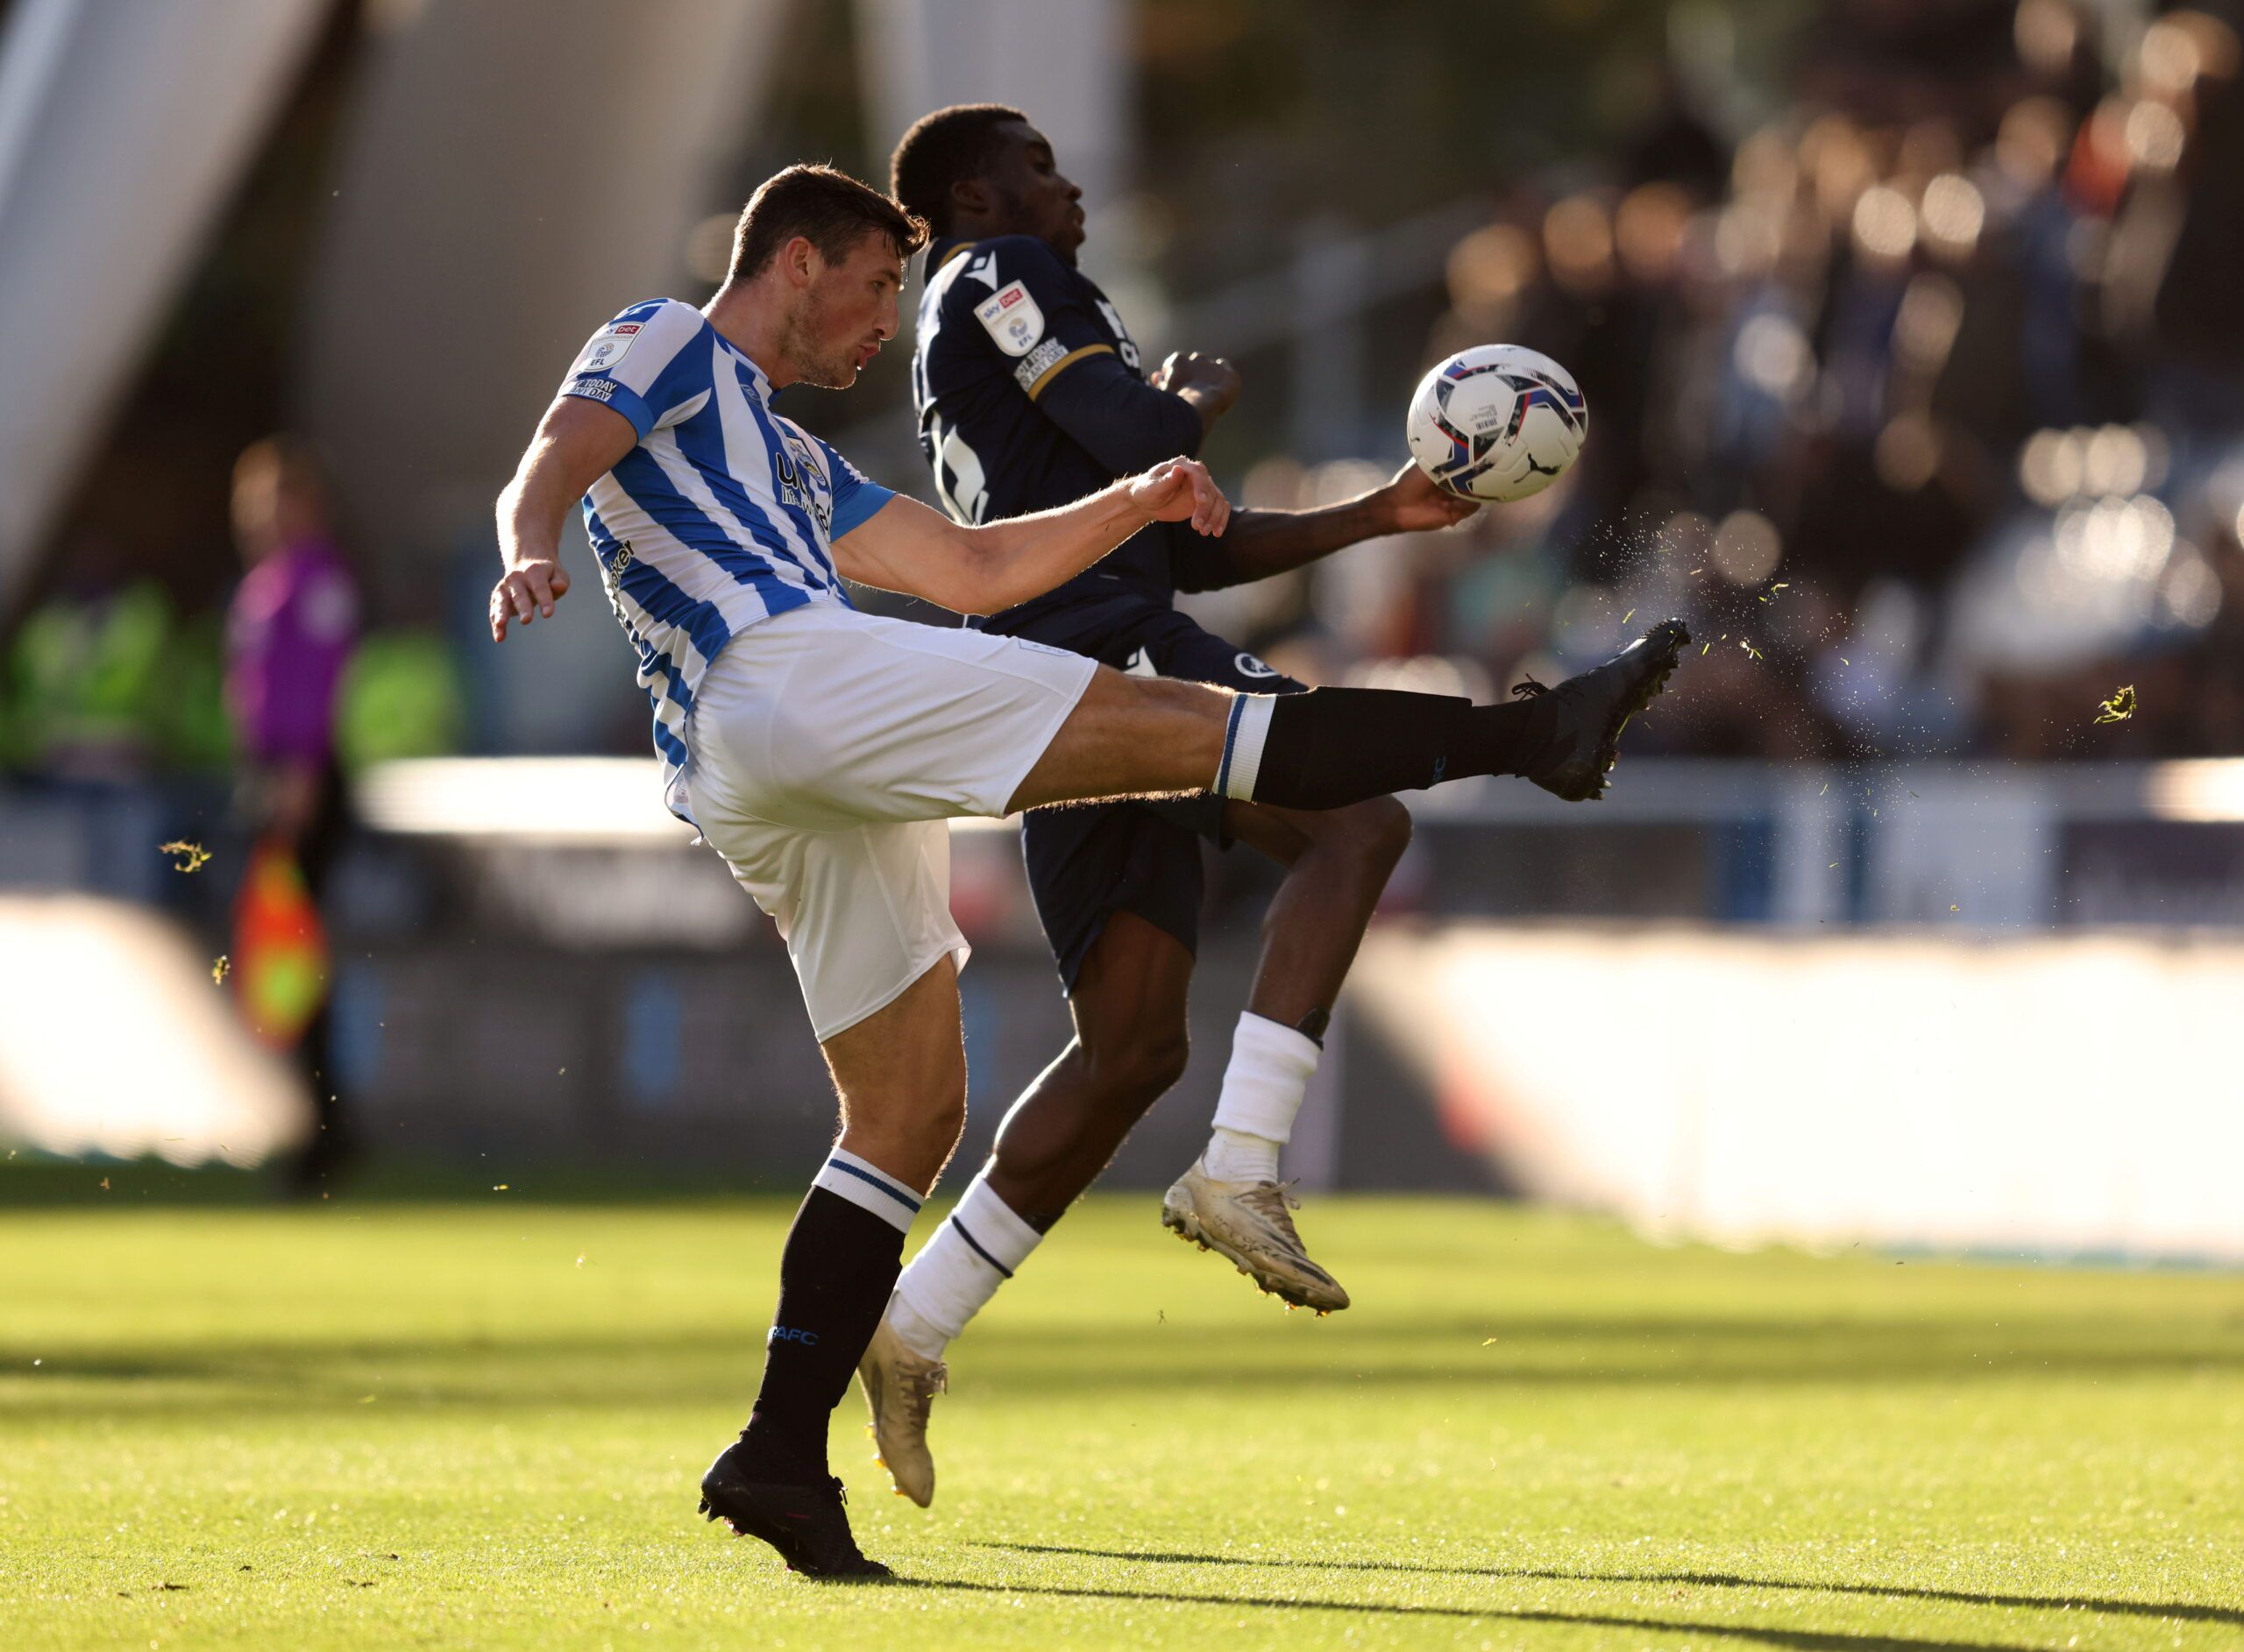 Soccer Football - Championship - Huddersfield Town v Millwall - John Smith's Stadium, Huddersfield, Britain - October 30, 2021 Huddersfield Town's Matty Pearson clears from Millwall's Sheyi Ojo  Action Images/John Clifton  EDITORIAL USE ONLY. No use with unauthorized audio, video, data, fixture lists, club/league logos or 